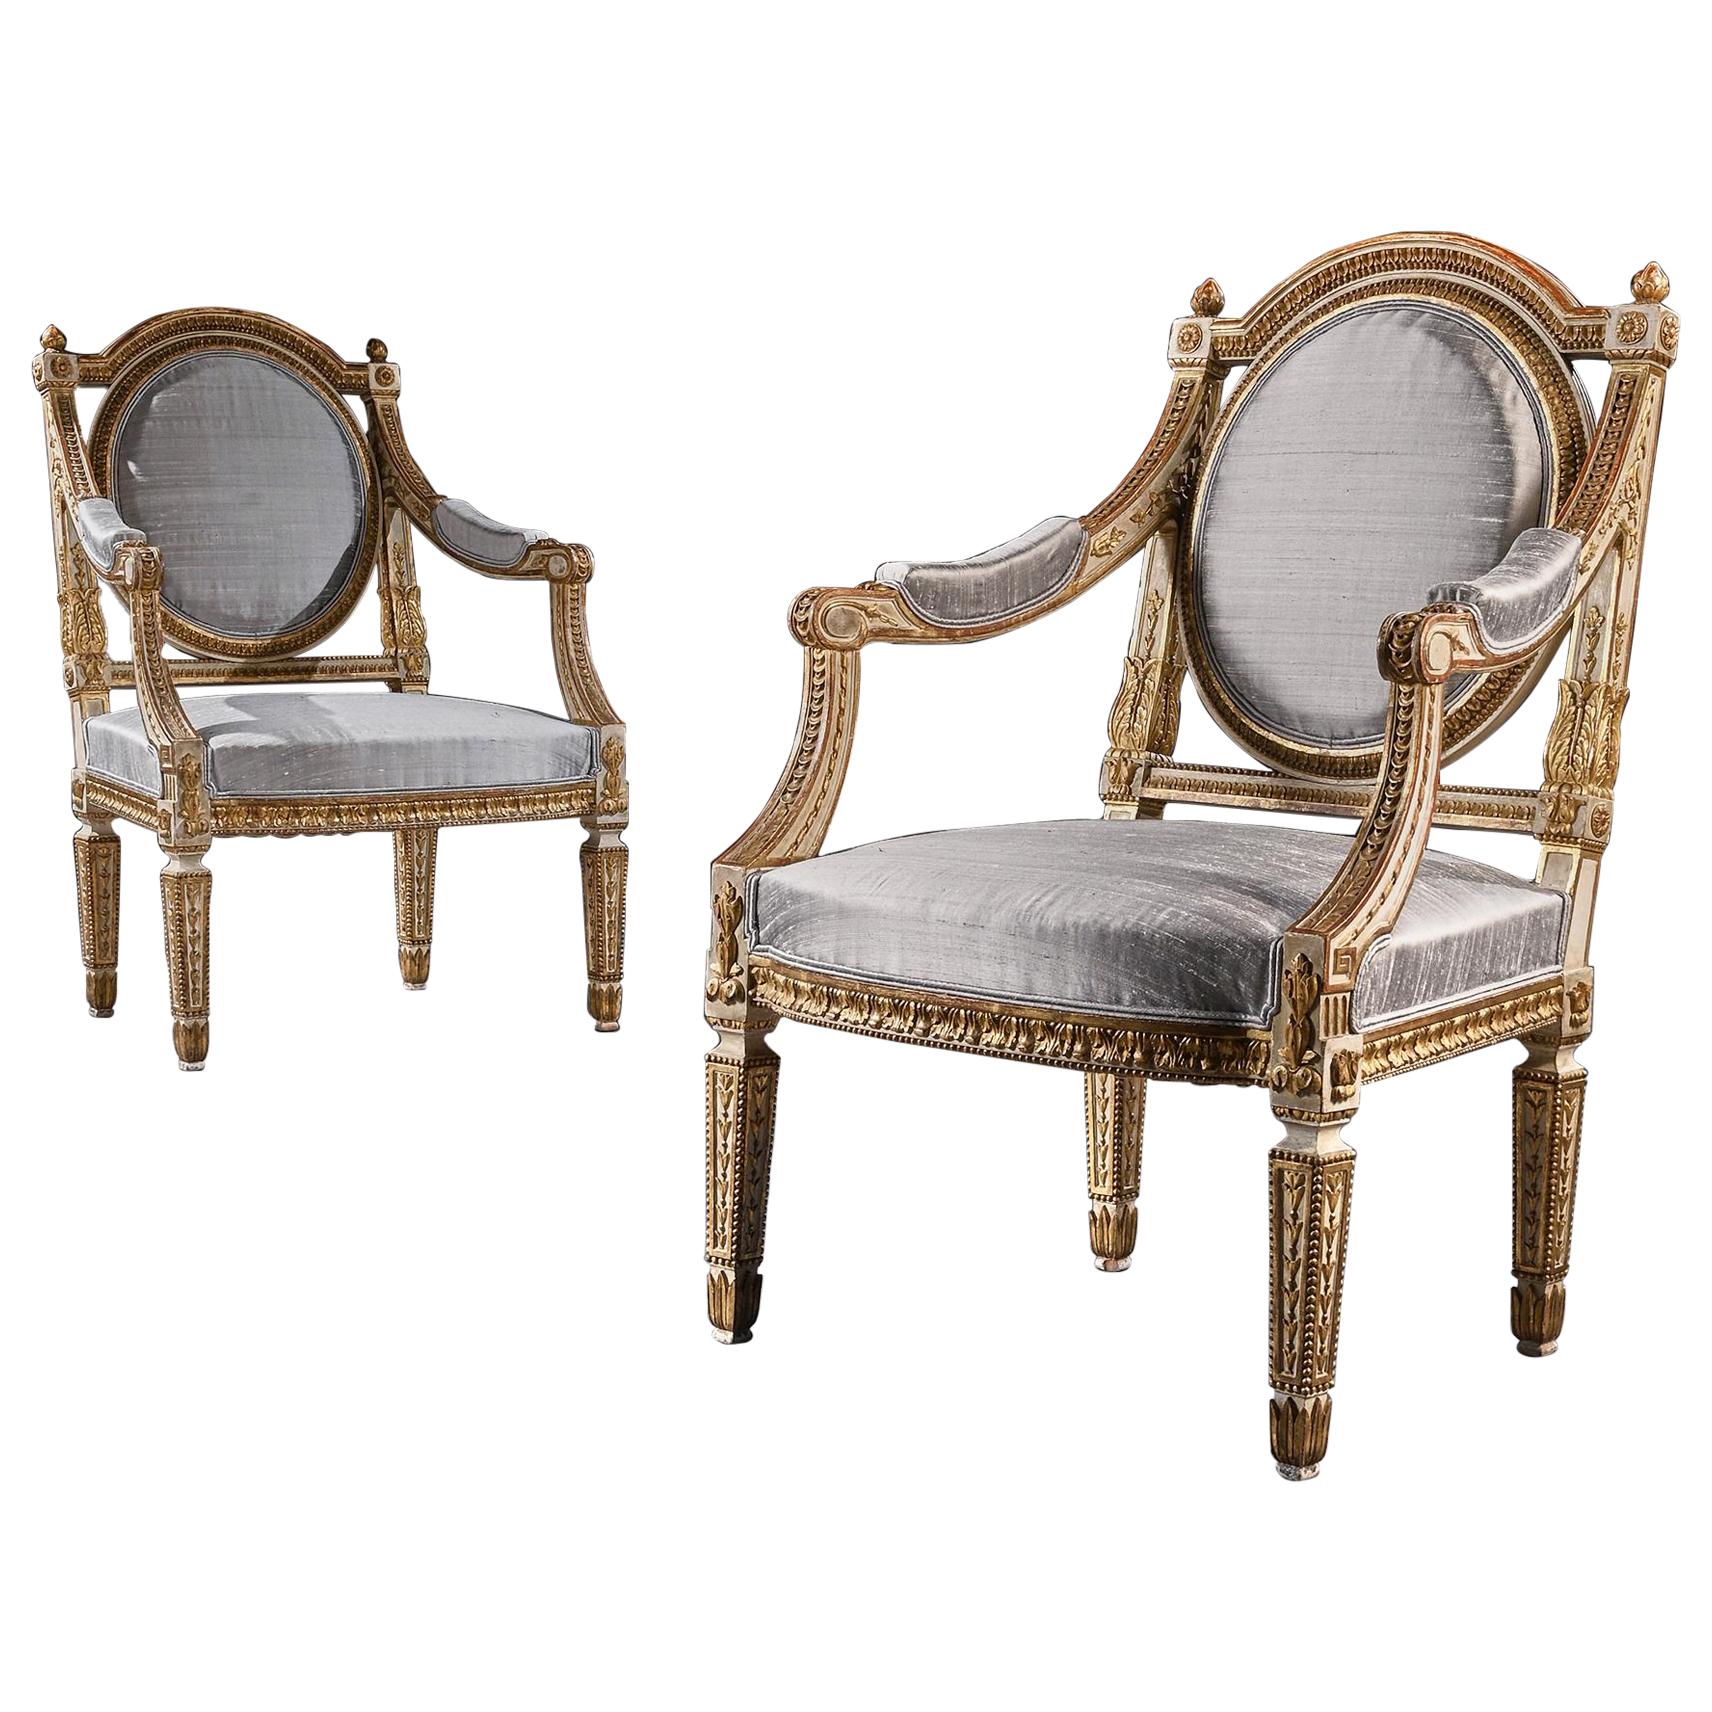 Fine Pair of 19th Century Decorative Italian Painted and Parcel Gilt Armchairs